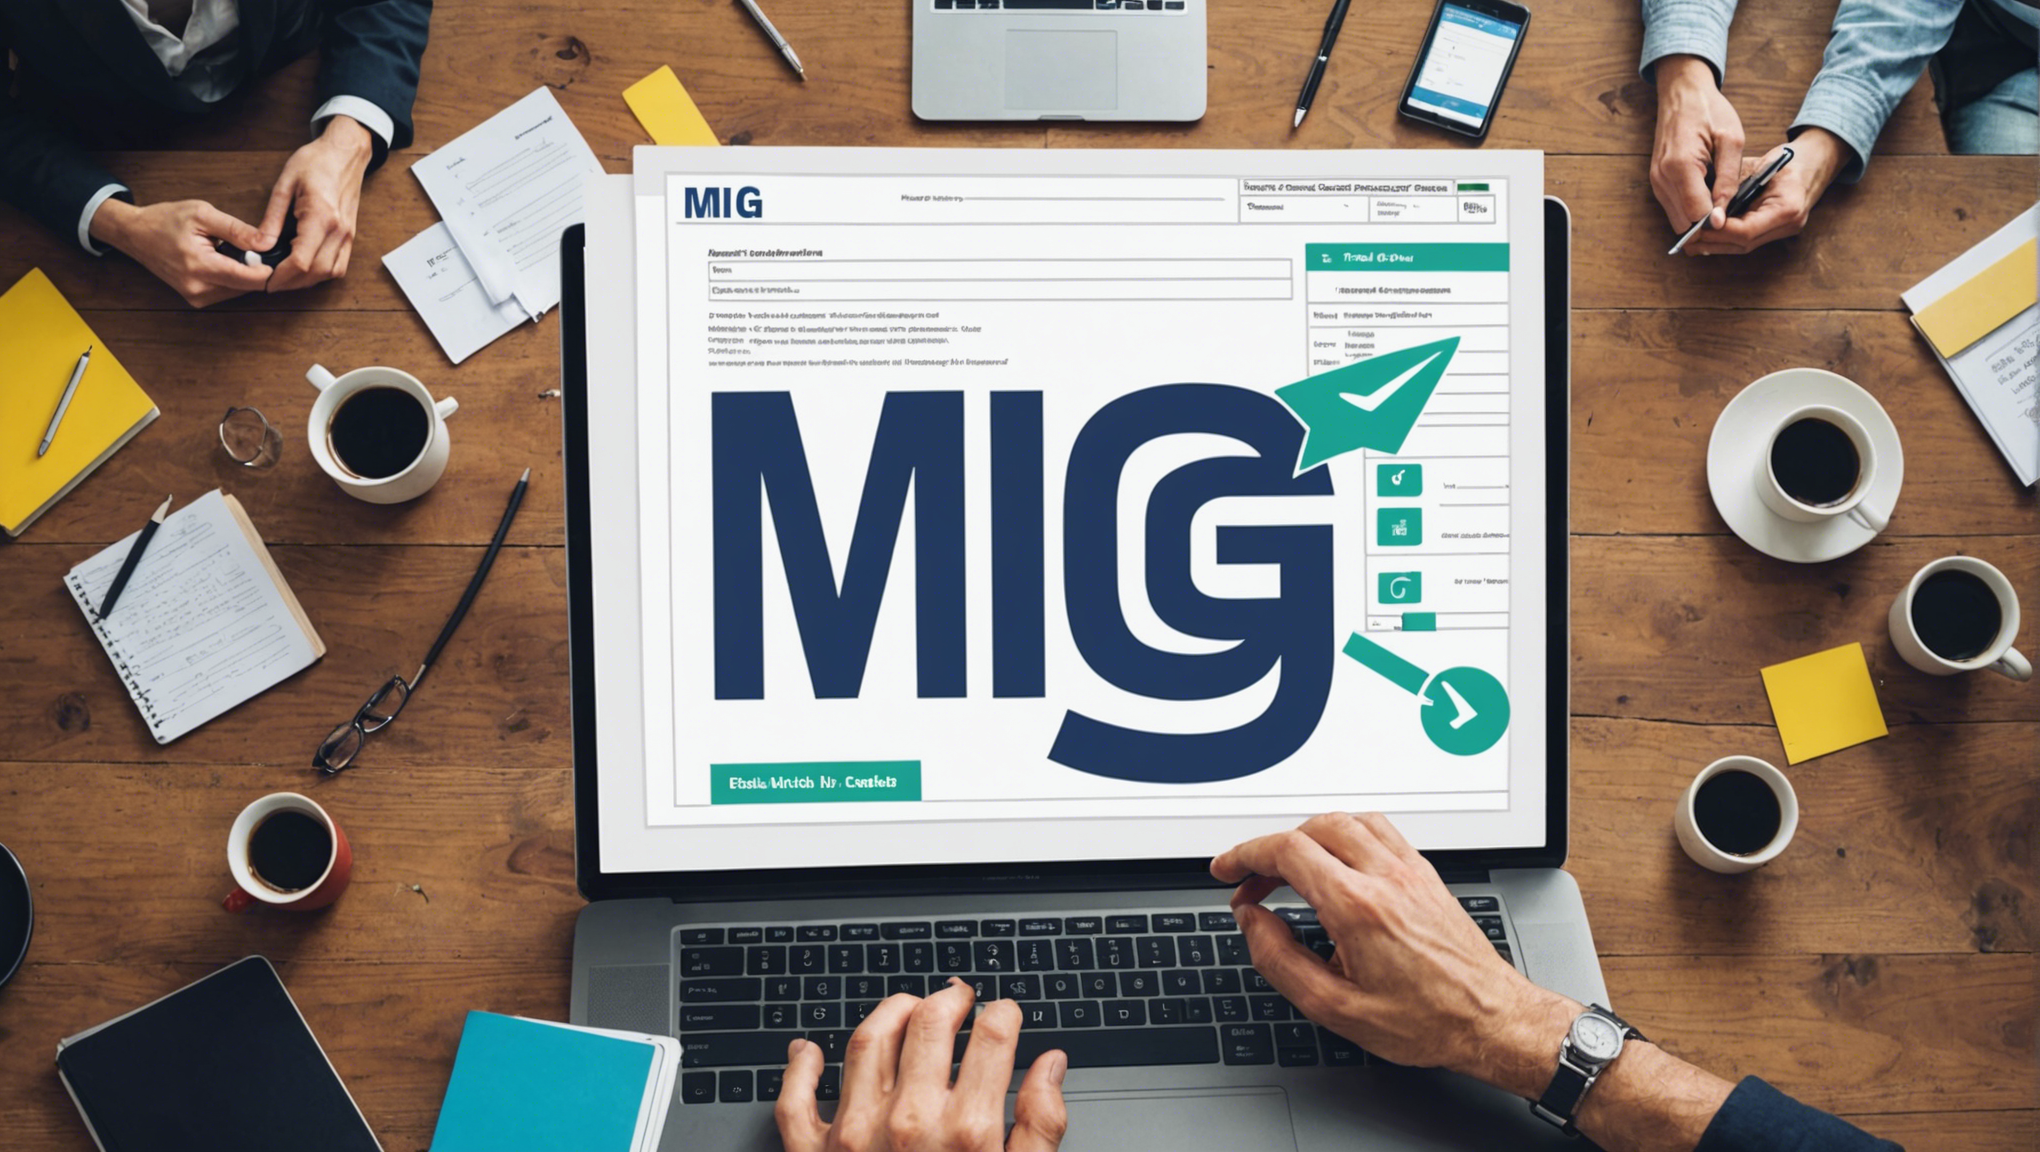 find the check-mig form online and get detailed instructions on how to fill it in and submit it easily.